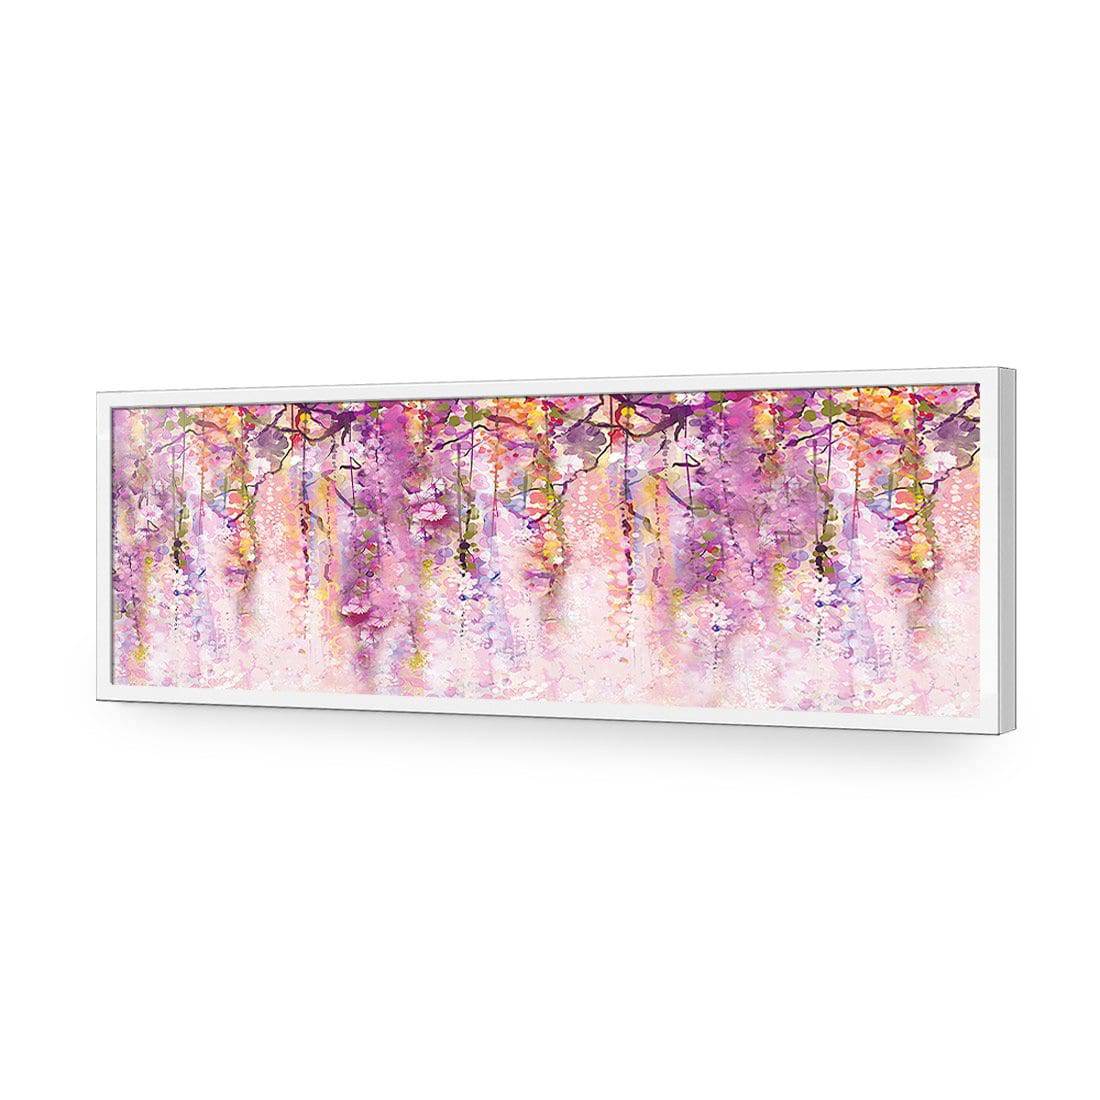 Lilac Dream, Long-Acrylic-Wall Art Design-Without Border-Acrylic - White Frame-60x20cm-Wall Art Designs